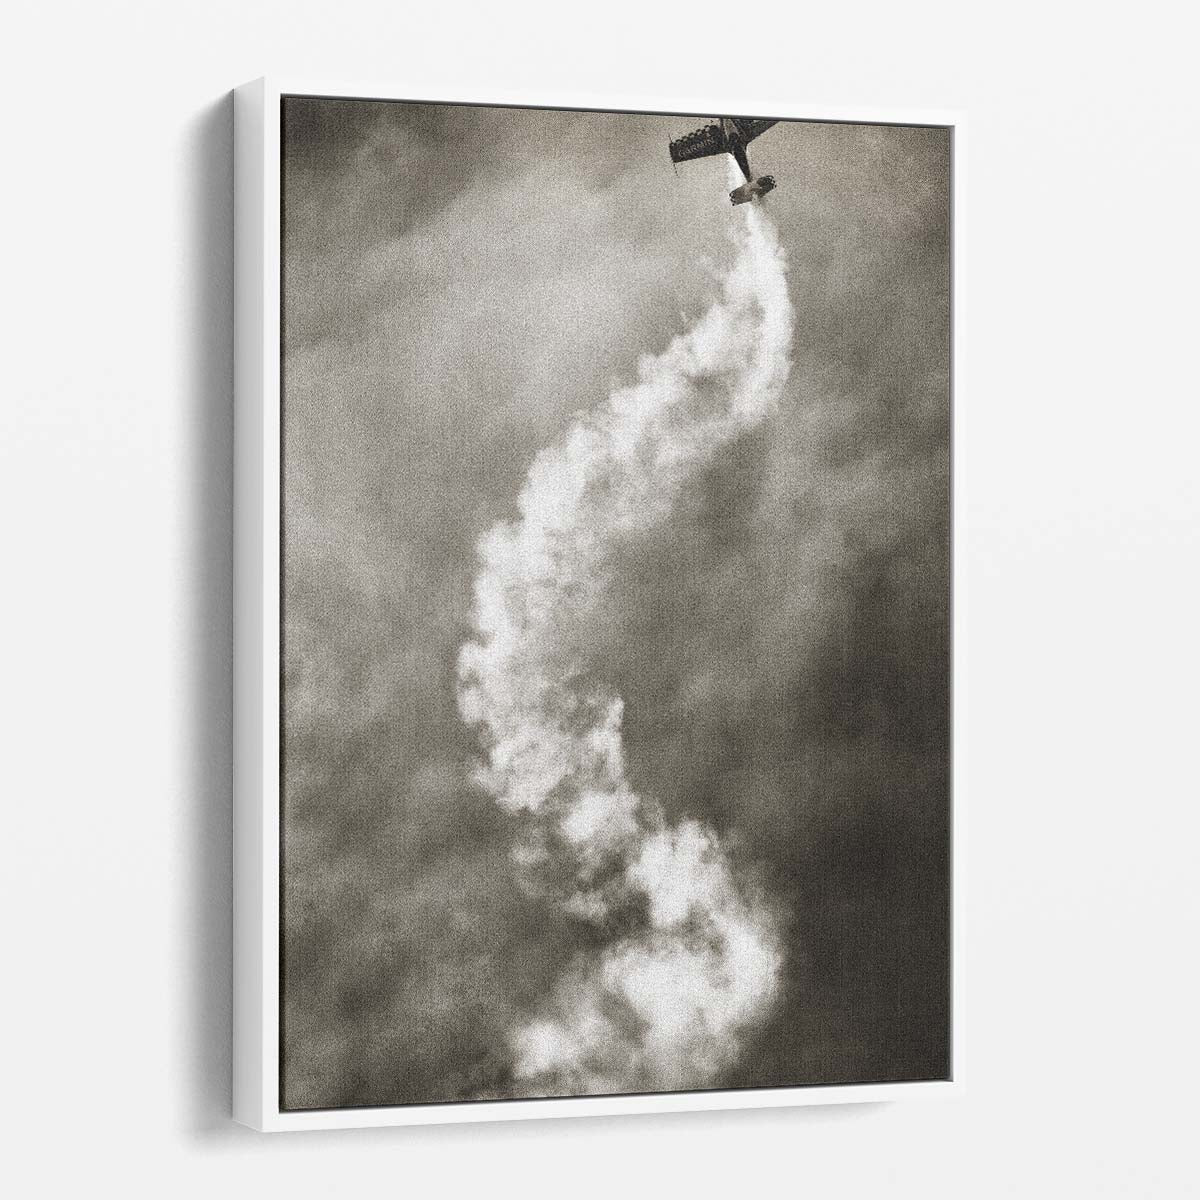 Vintage Aviation Photography Fast Stunt Plane Tricks in Sepia by Luxuriance Designs, made in USA